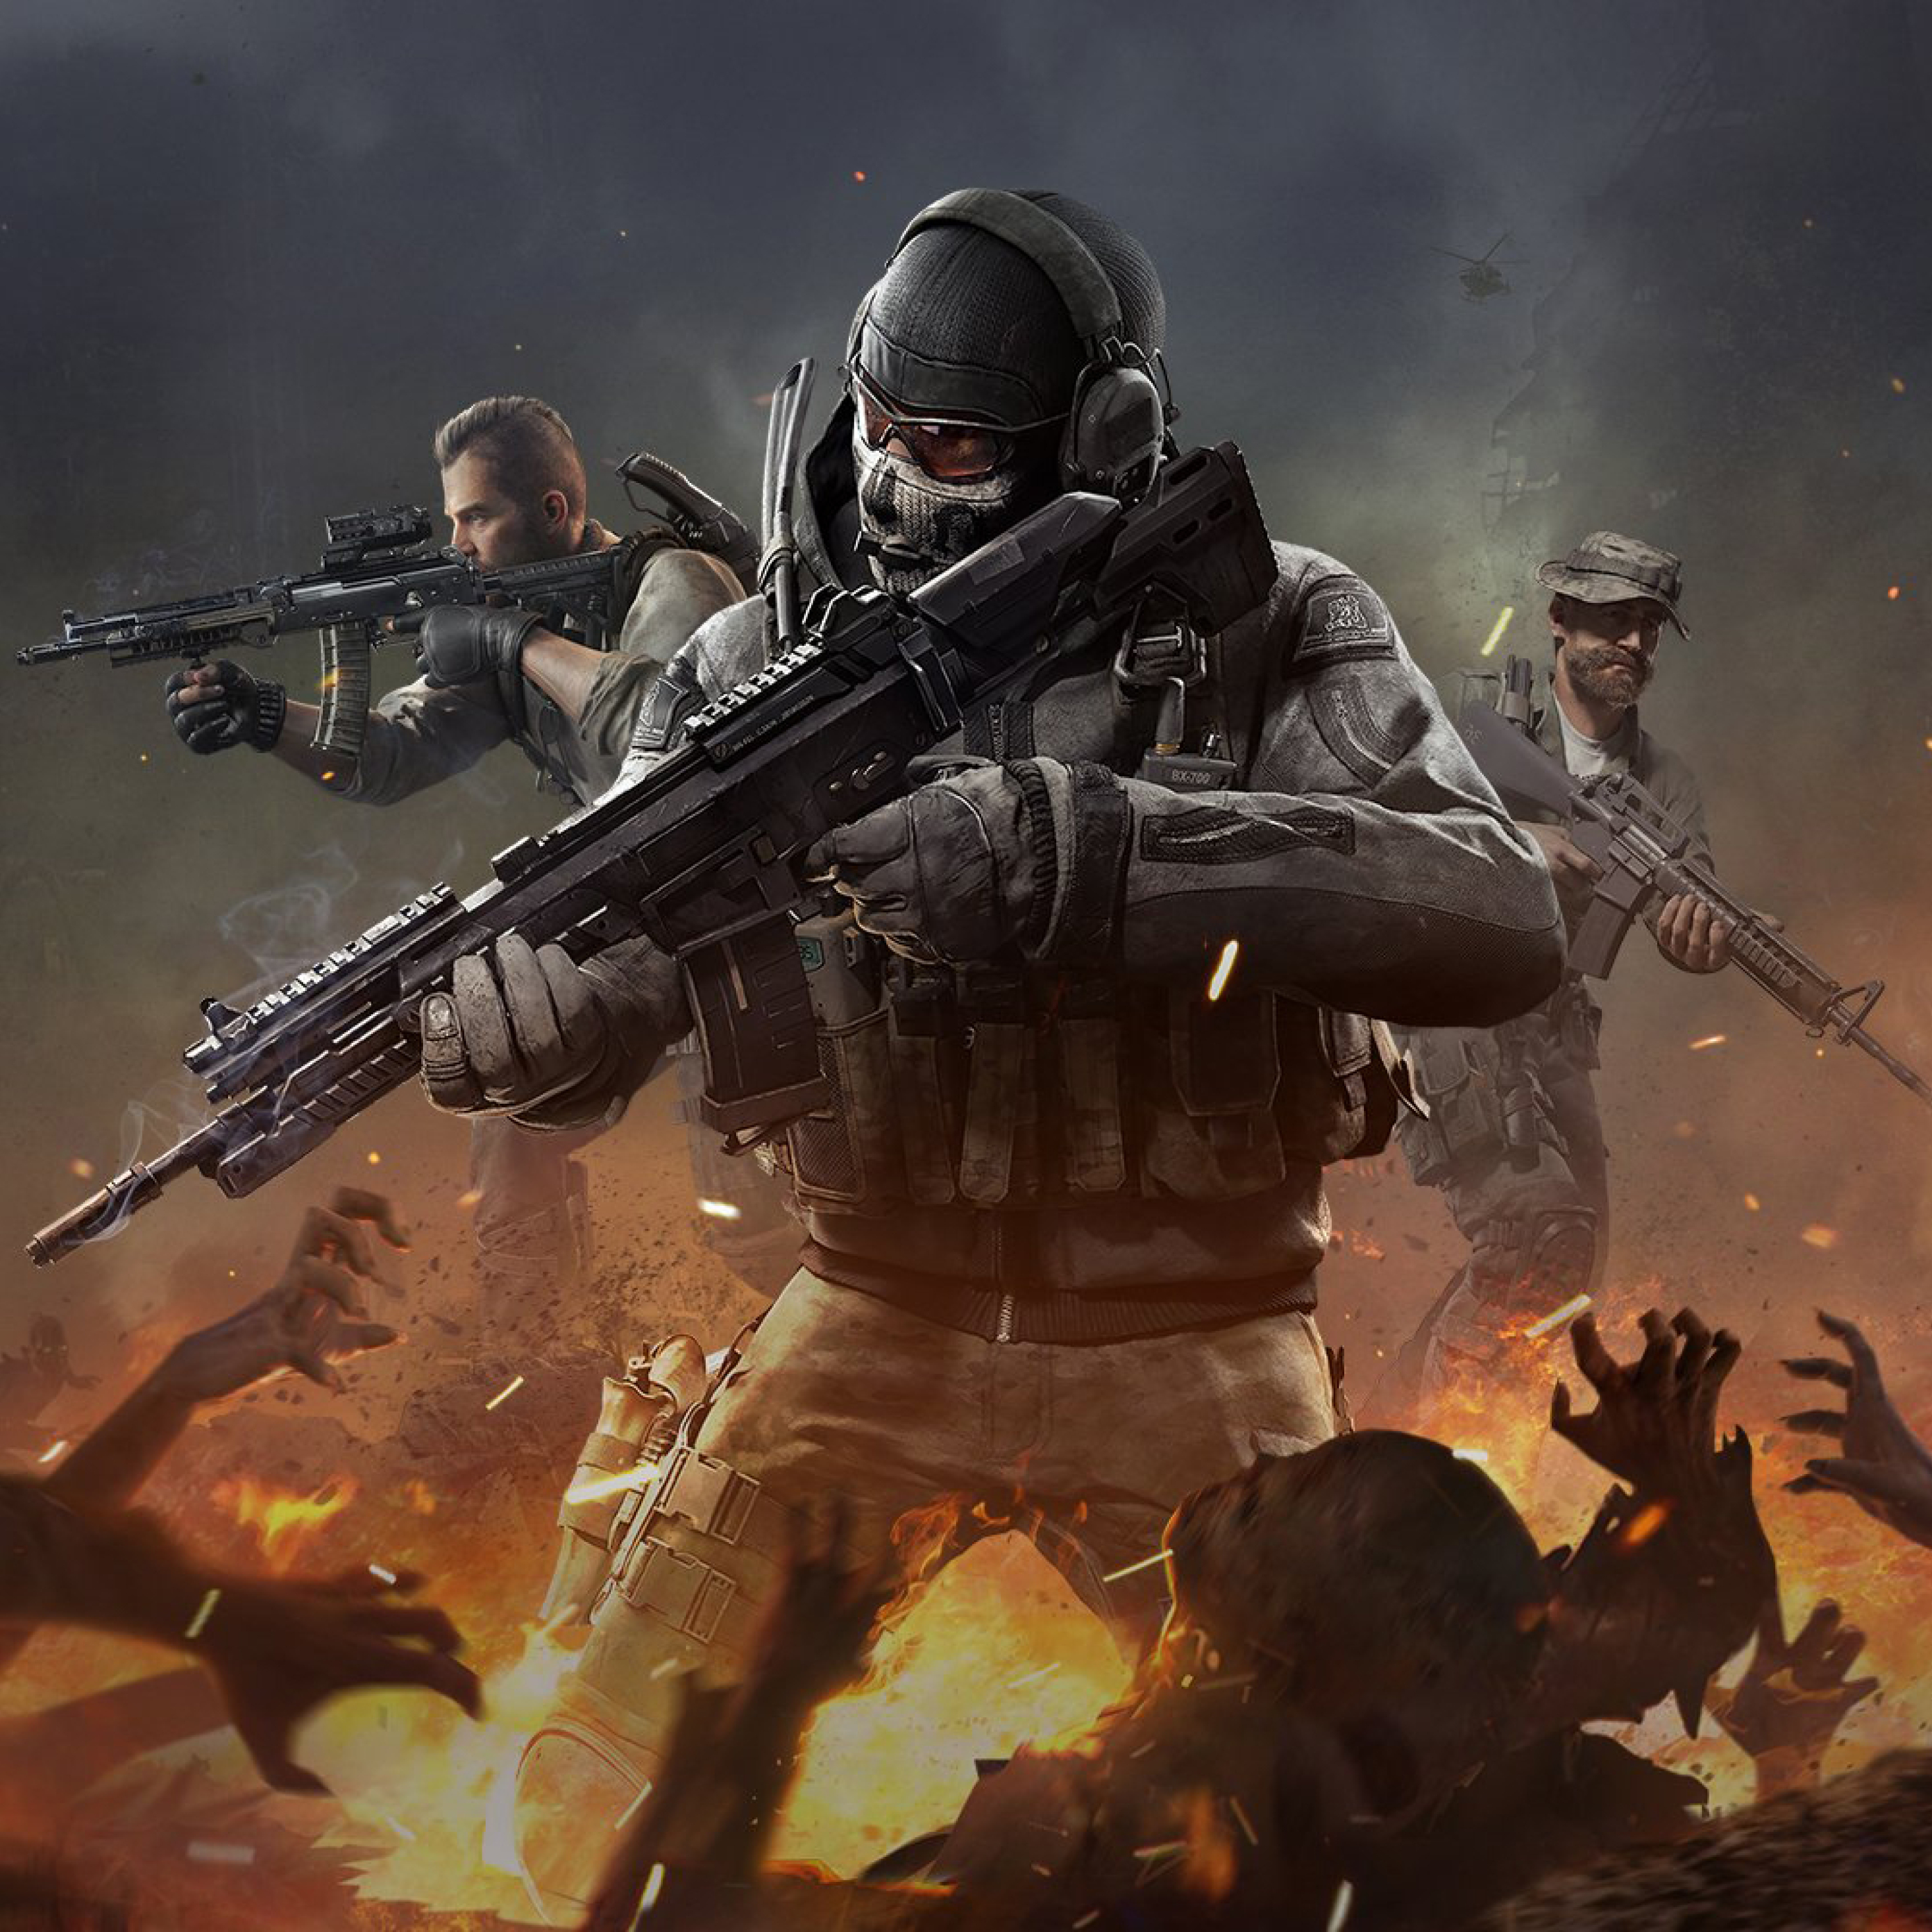 Warzone mobile play market. Варзоне Call of Duty. Call of Duty Warzone мобайл. Гоуст из Call of Duty mobile. Call of Duty Warzone 2021.